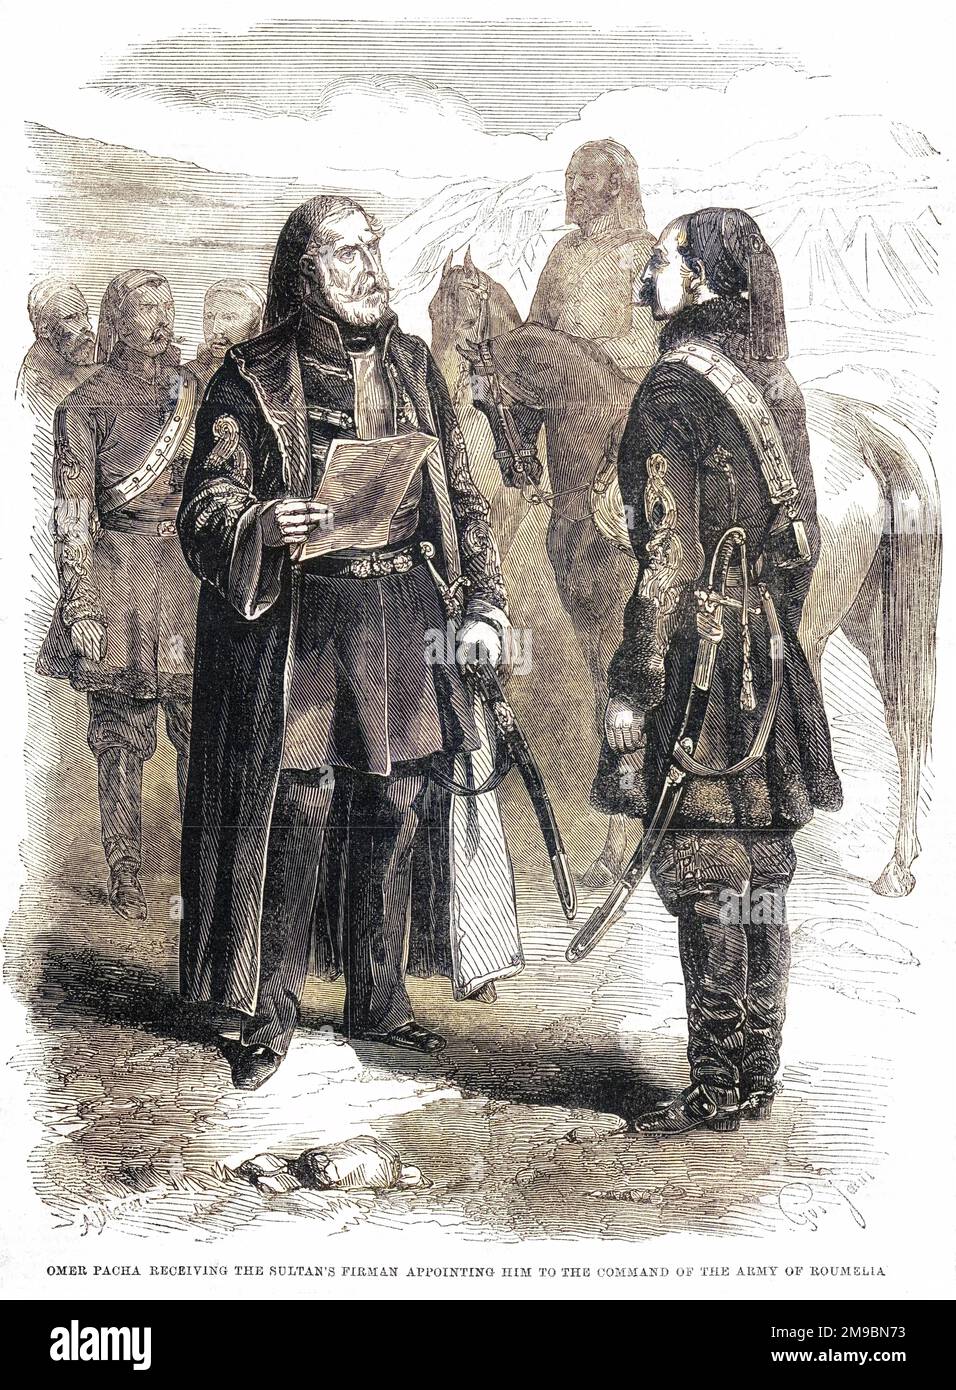 OMER (or Omar) PASHA real name : Michael Lattas (1806 - 1871), Croatian-born general in the Turkish army, receiving the Sultan's letter appointing him commander, army of Roumelia. Stock Photo